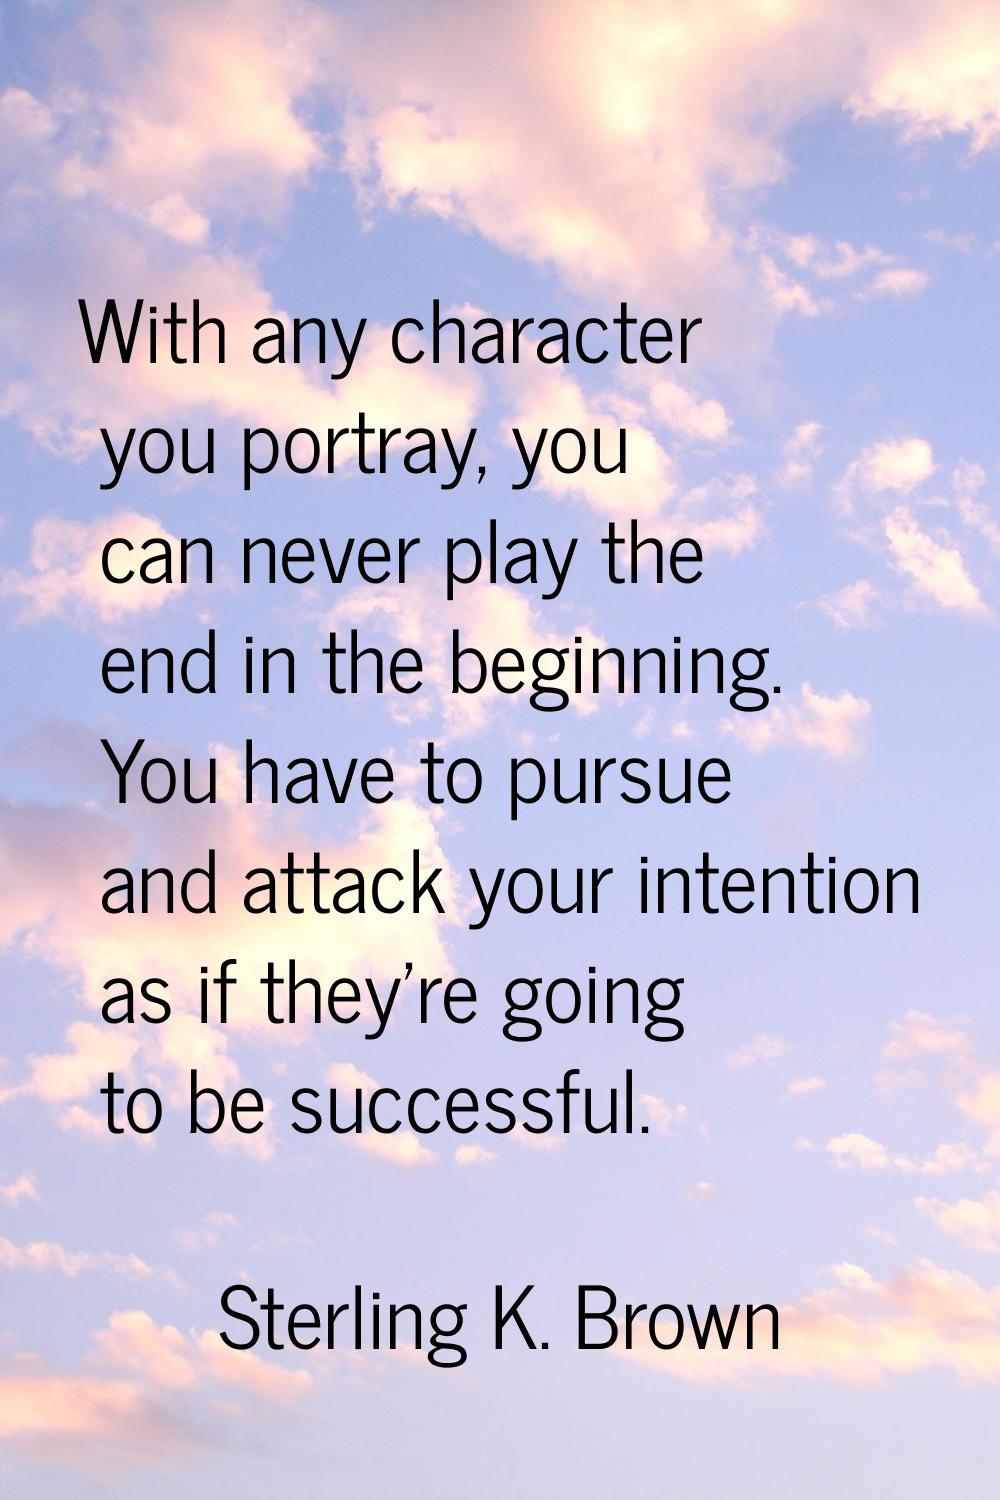 With any character you portray, you can never play the end in the beginning. You have to pursue and